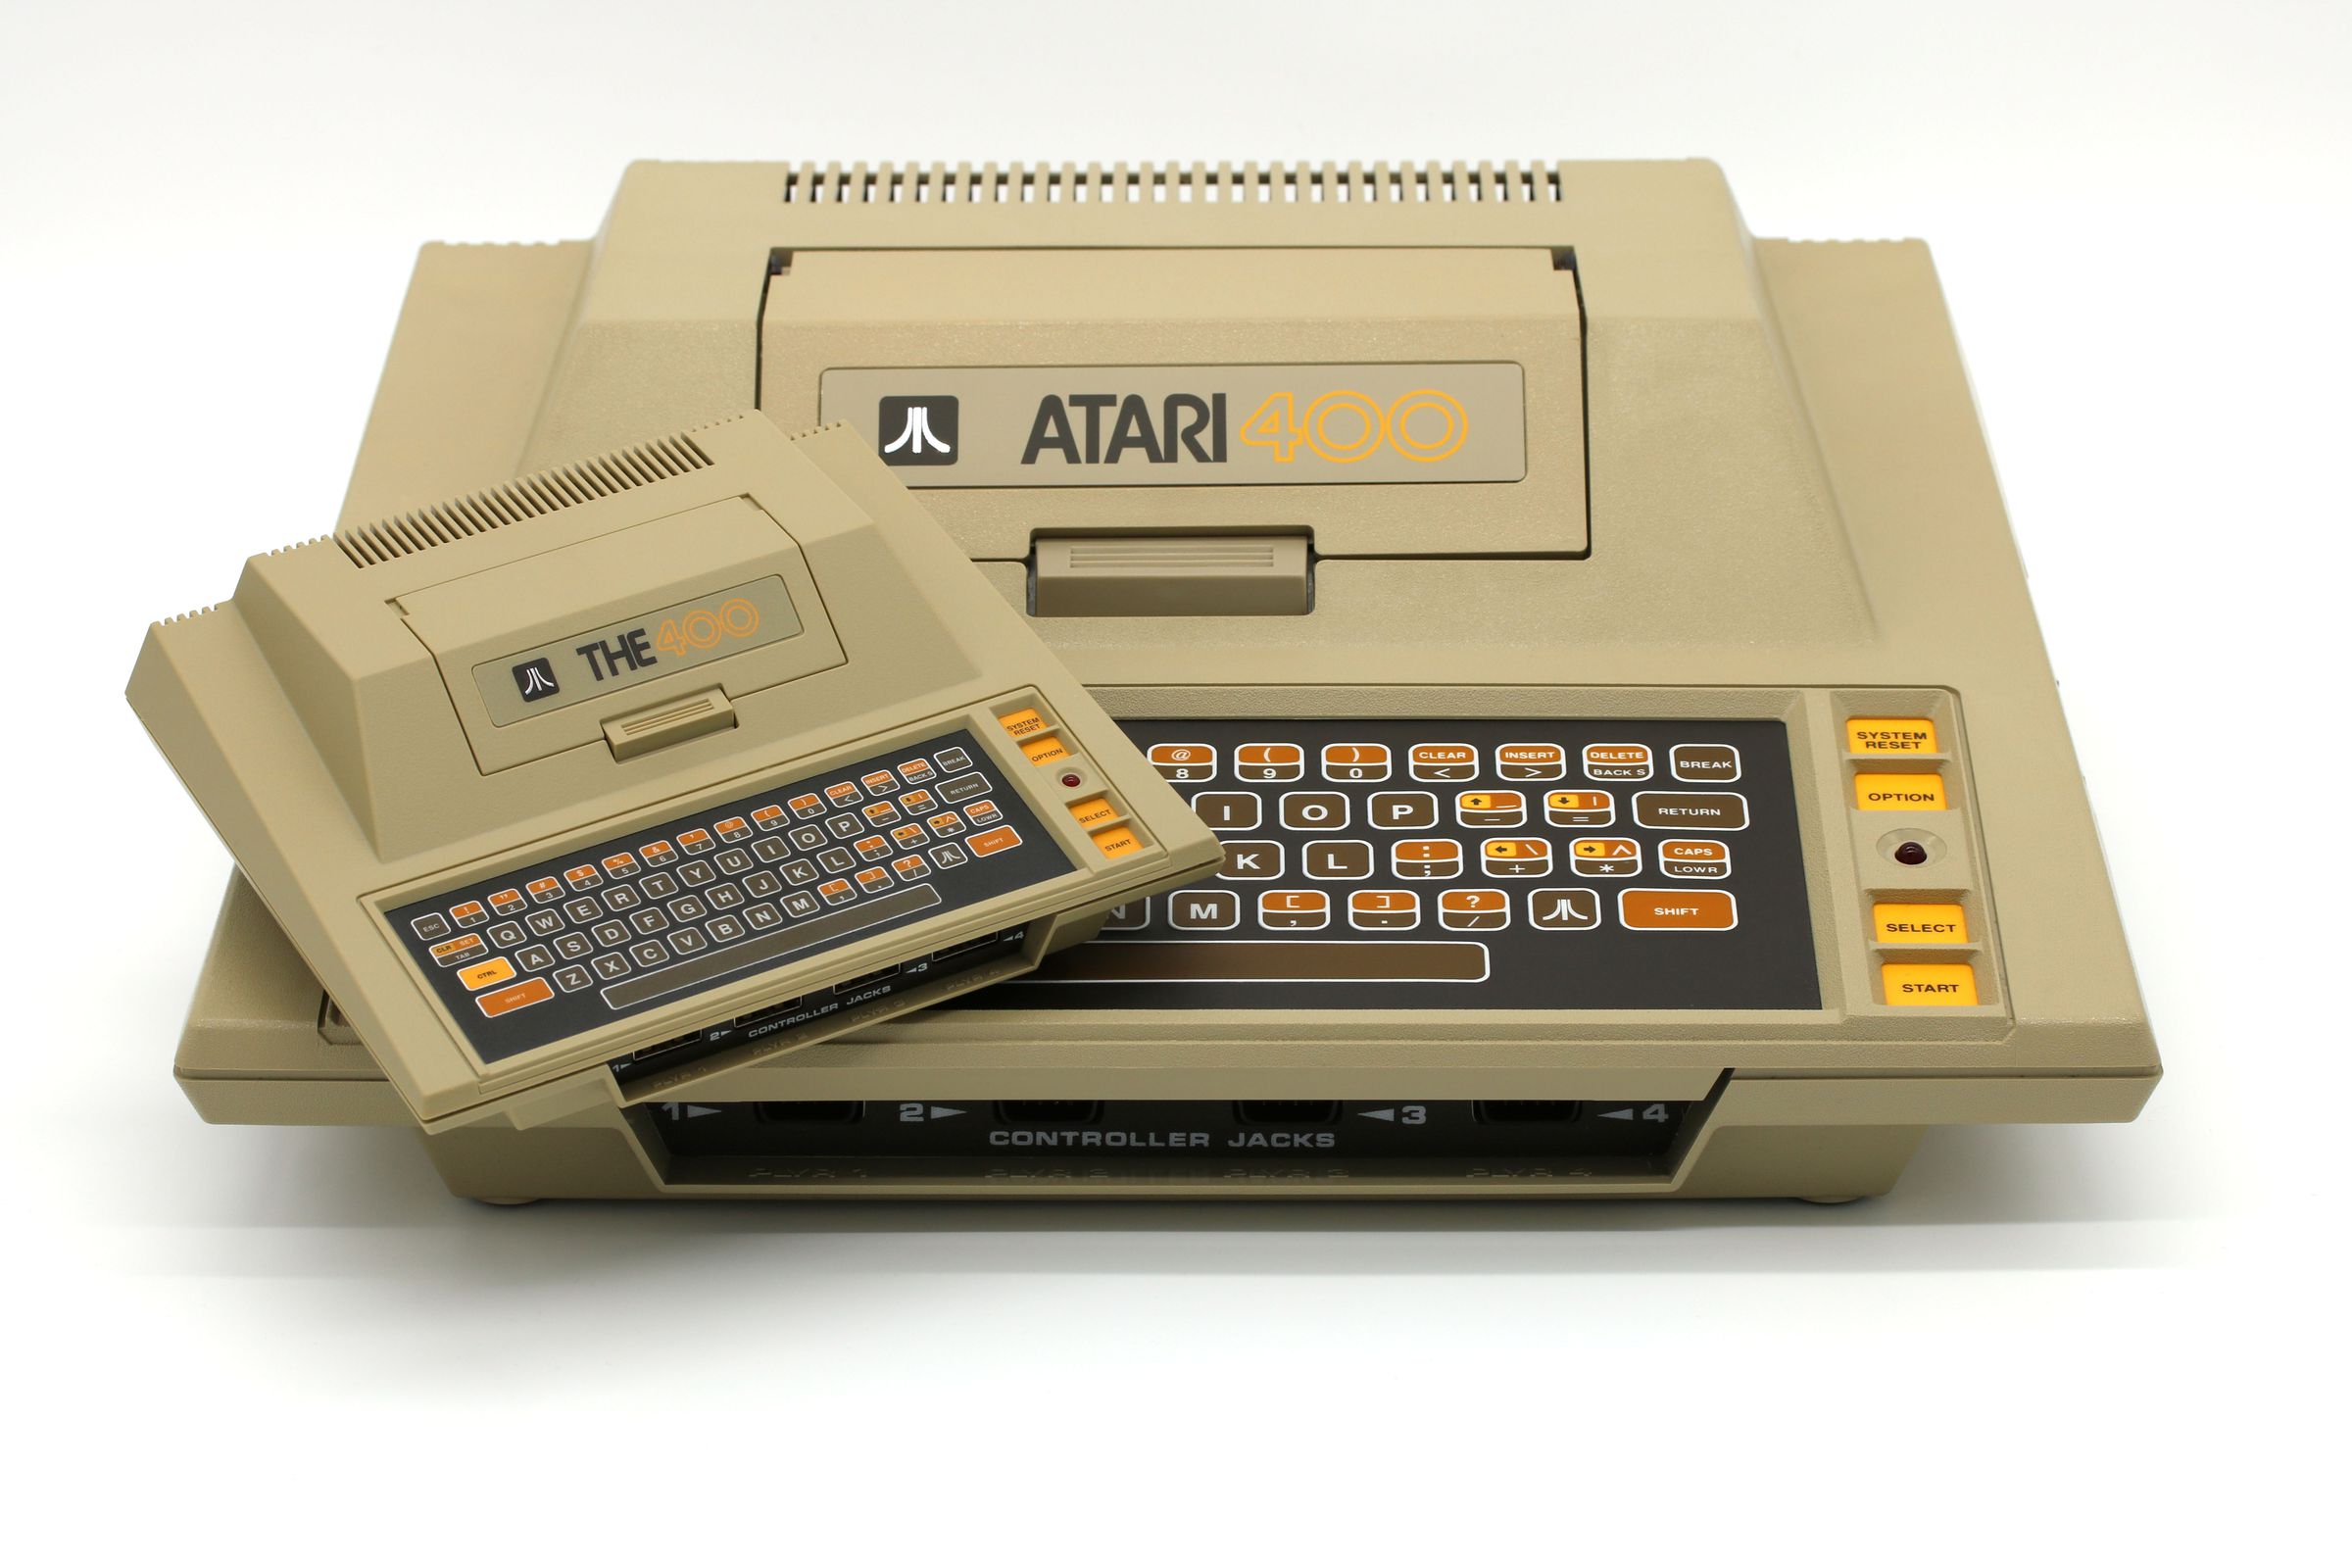 The Atari 400 Mini is a cute little slice of video game history